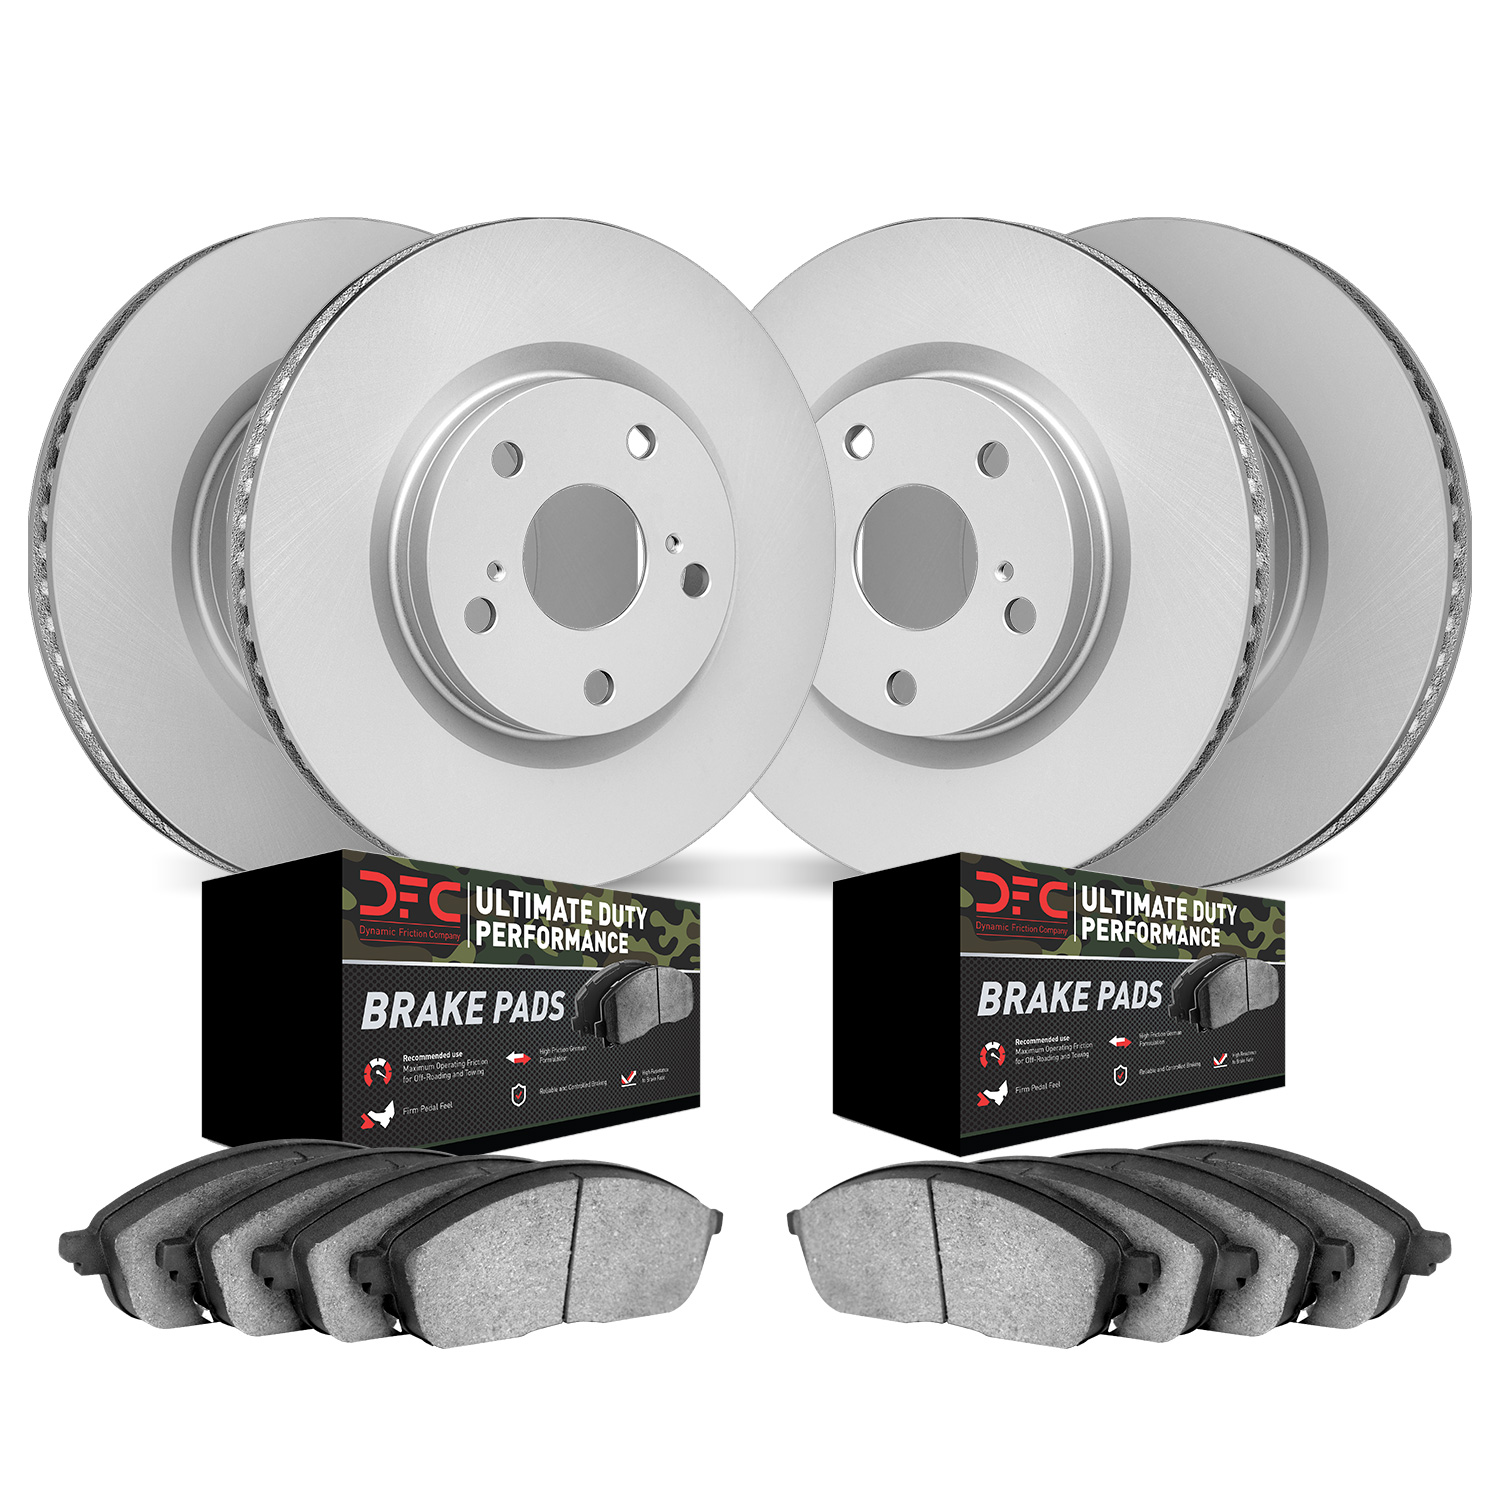 4404-42005 Geospec Brake Rotors with Ultimate-Duty Brake Pads Kit, Fits Select Mopar, Position: Front and Rear